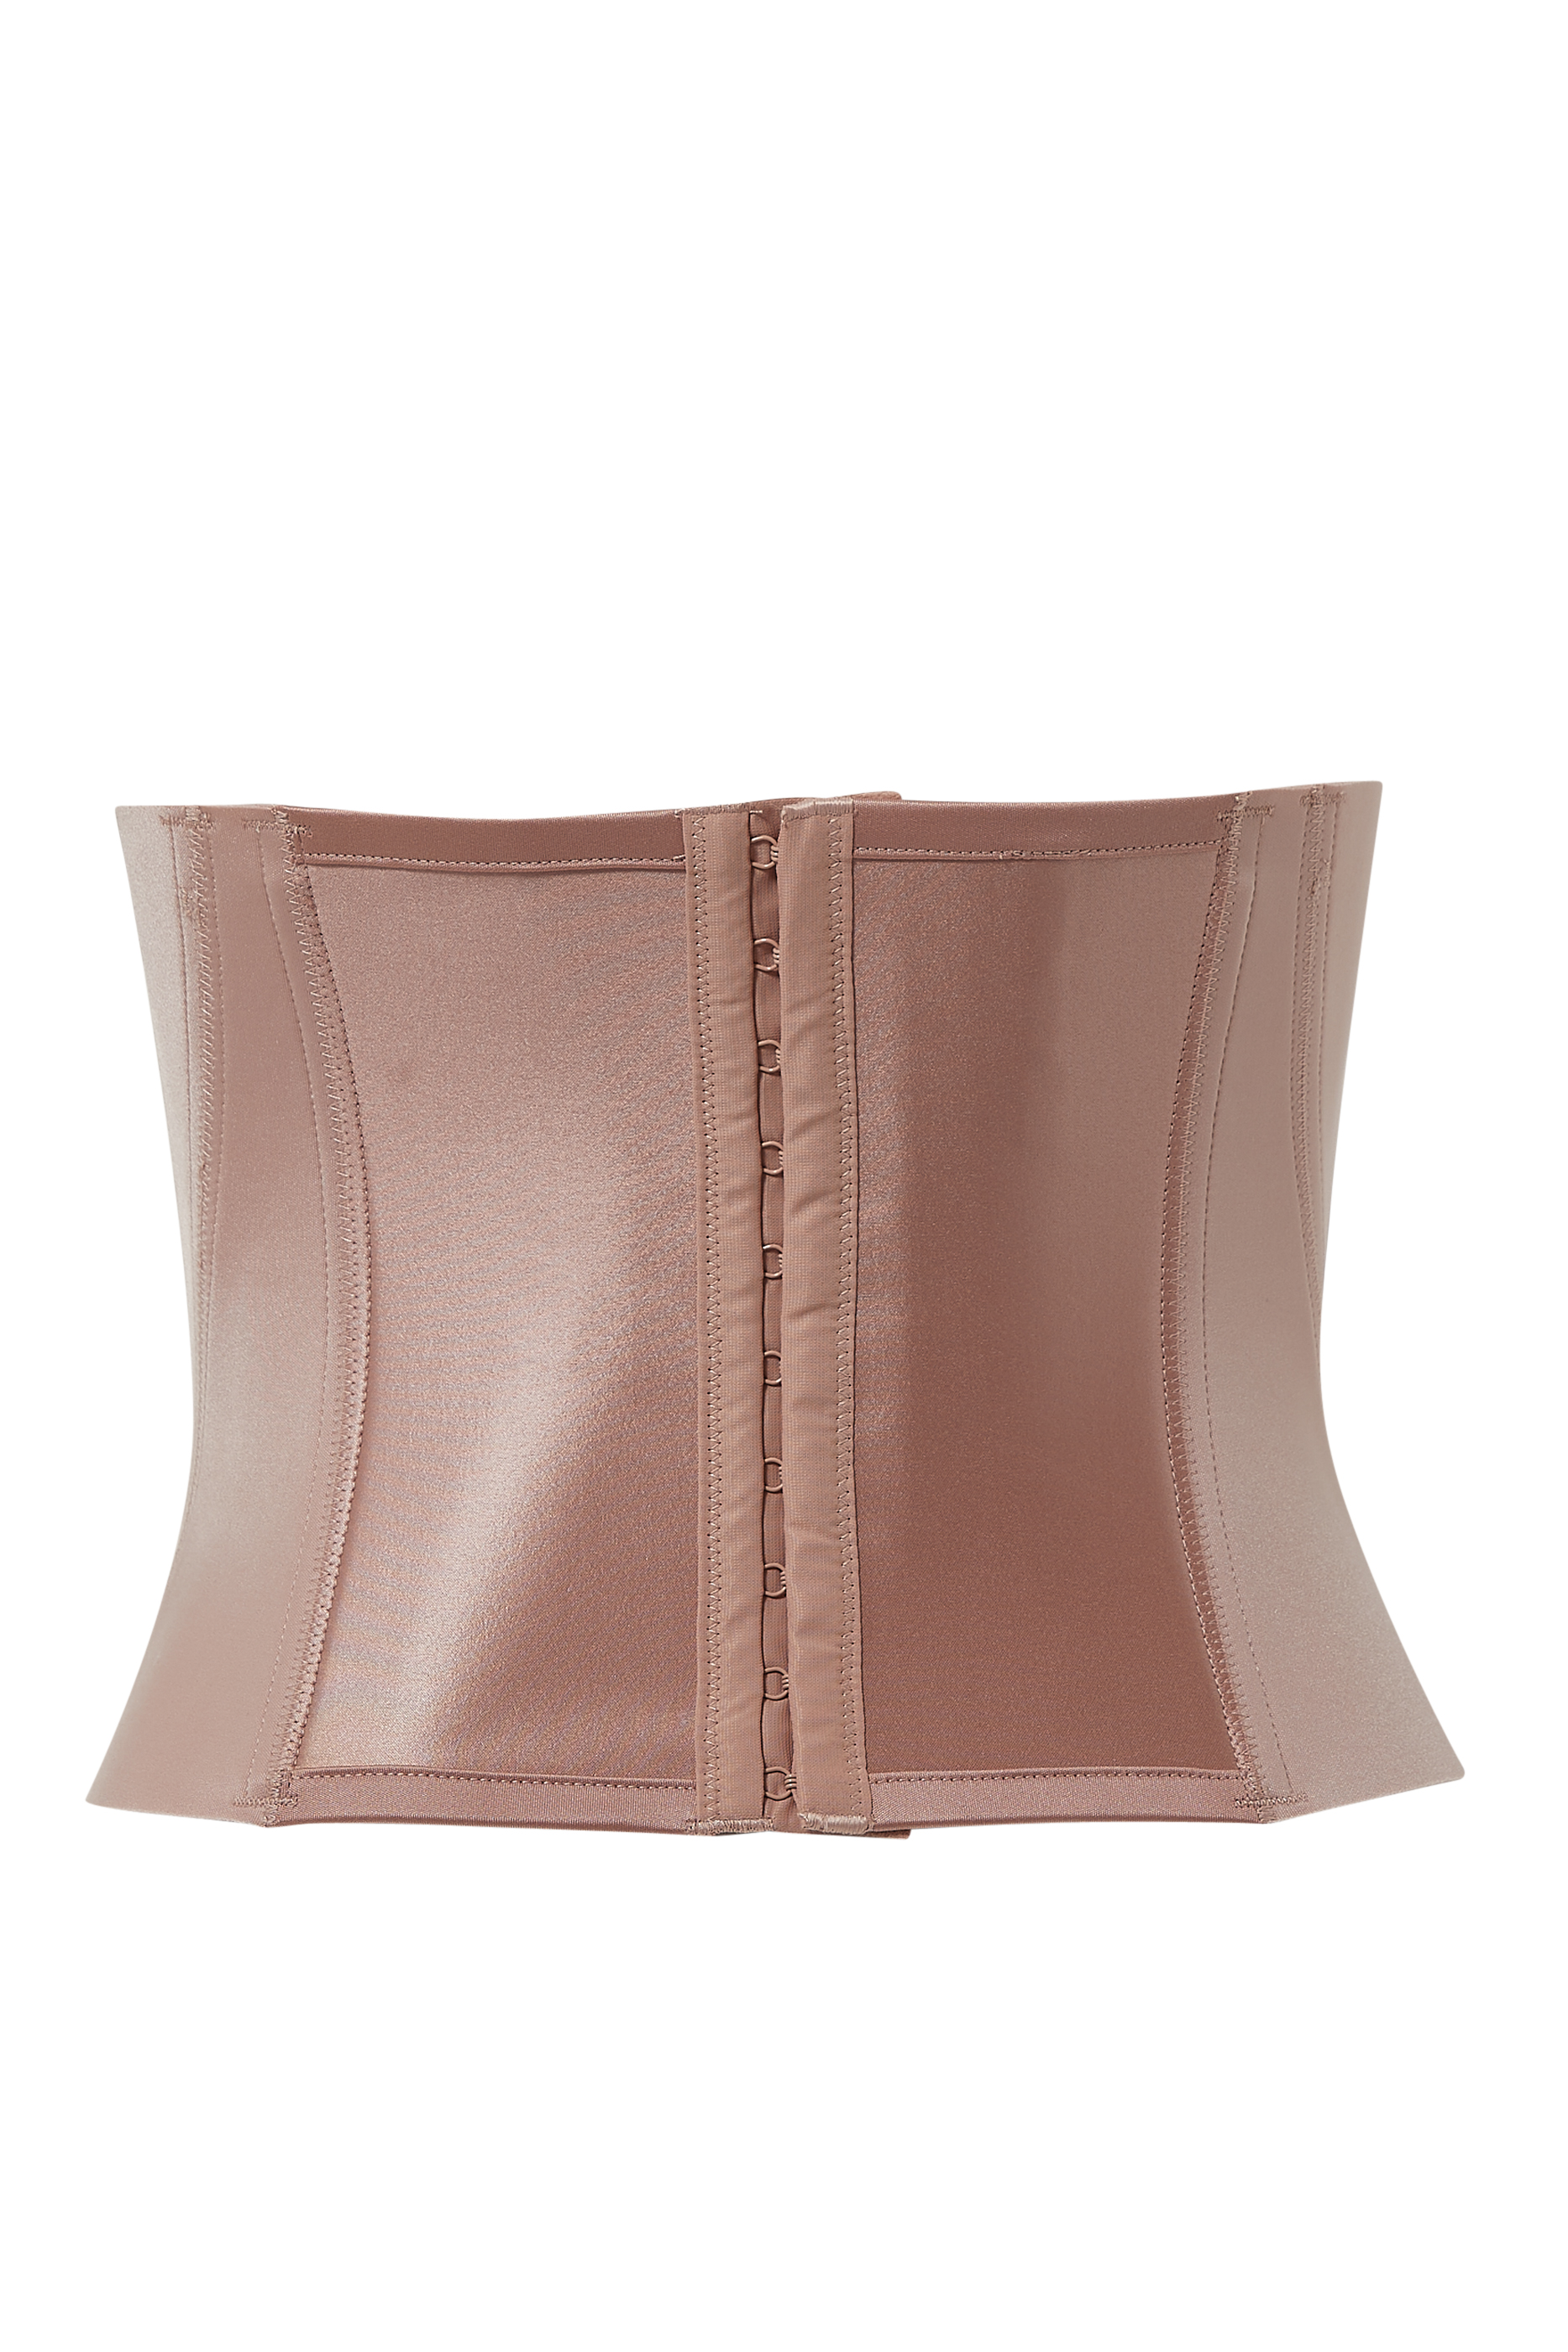 Buy Spanx Under Sculpture Corset for Womens